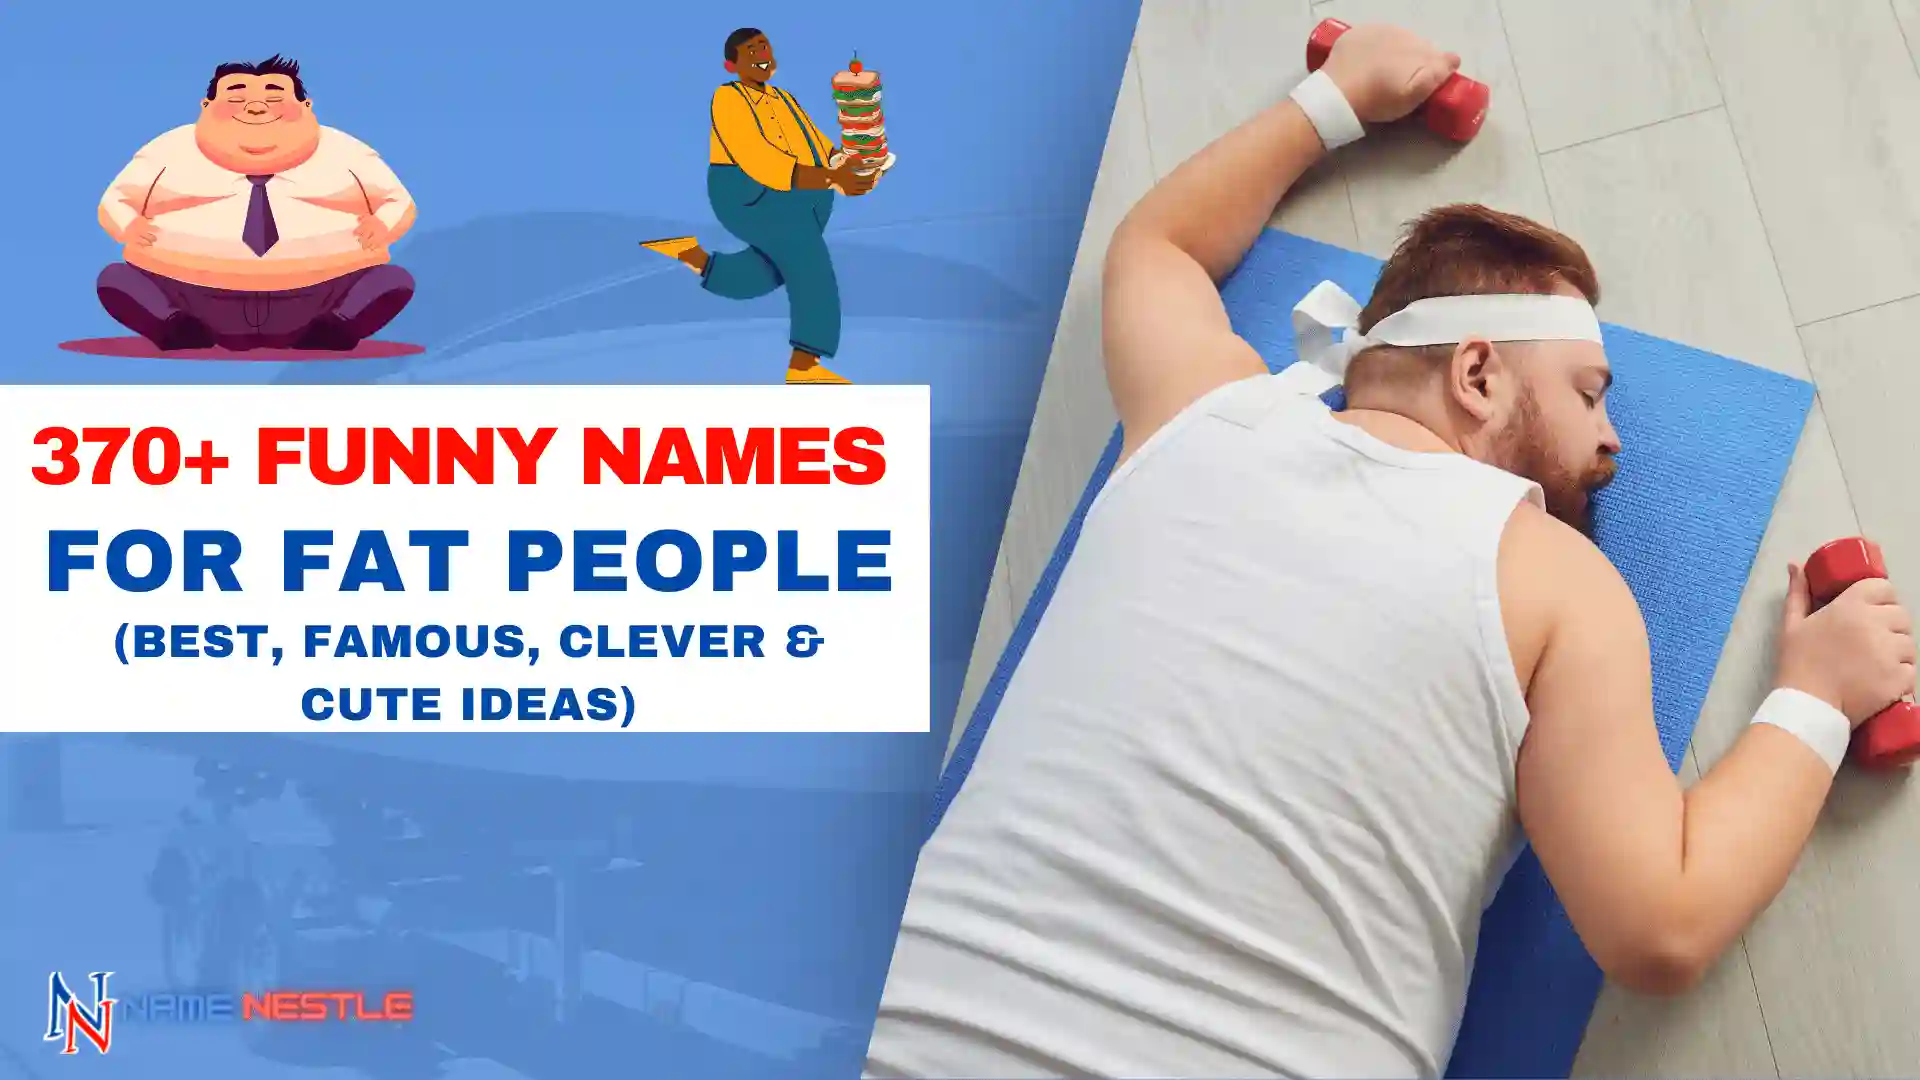 370+ Funny Names for Fat People (Best, Famous, Clever & Cute Ideas)